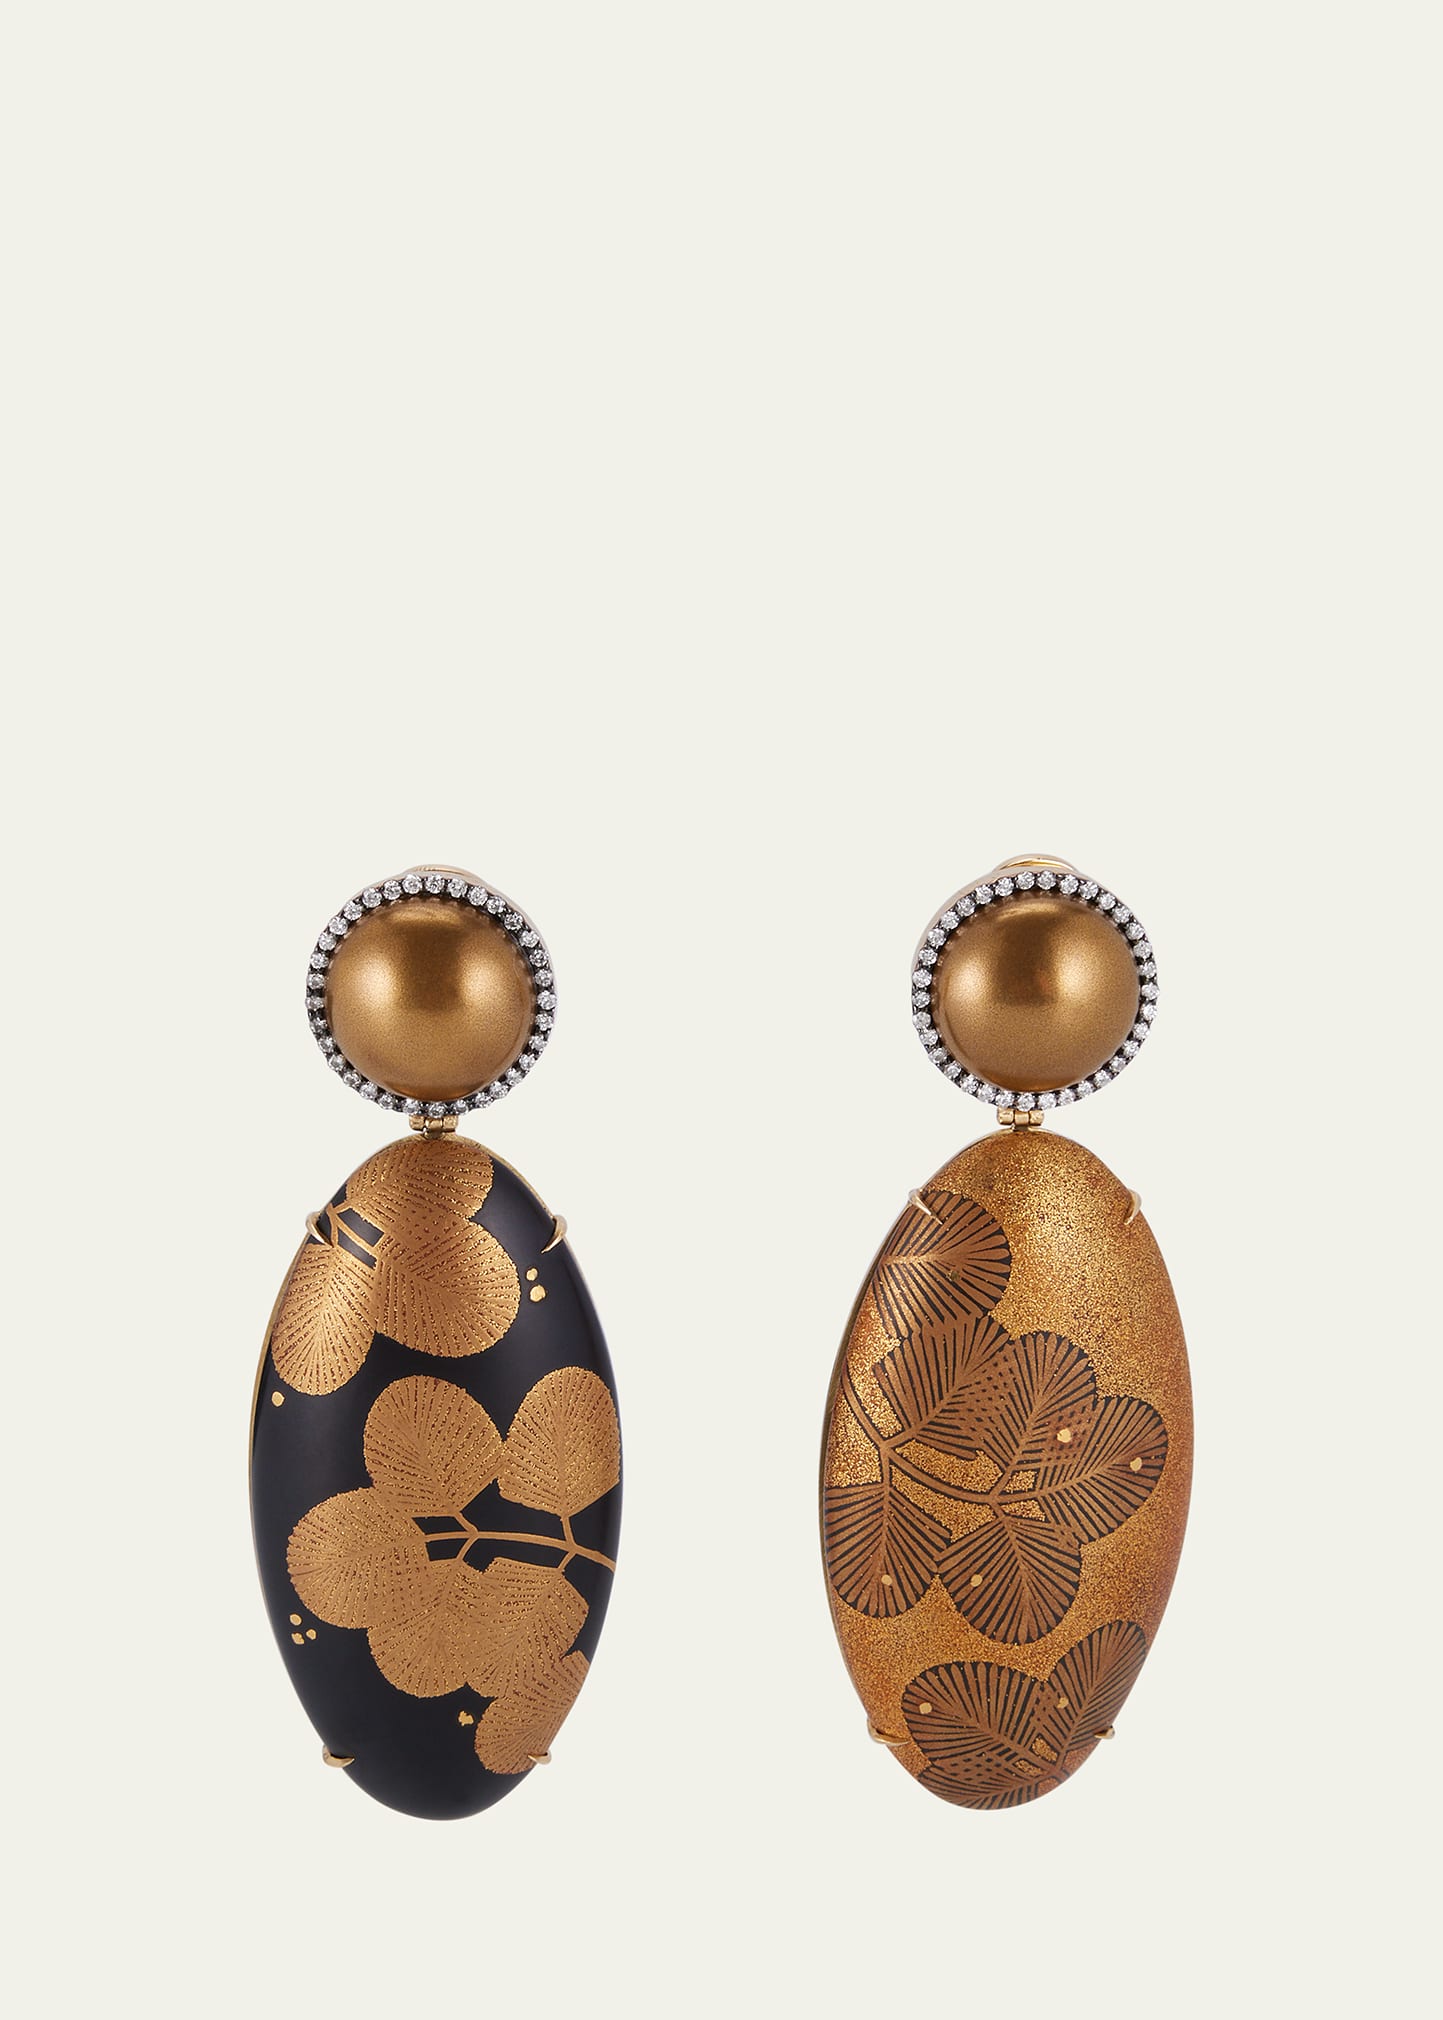 18k Yellow Gold Lacquer and Diamond Earrings